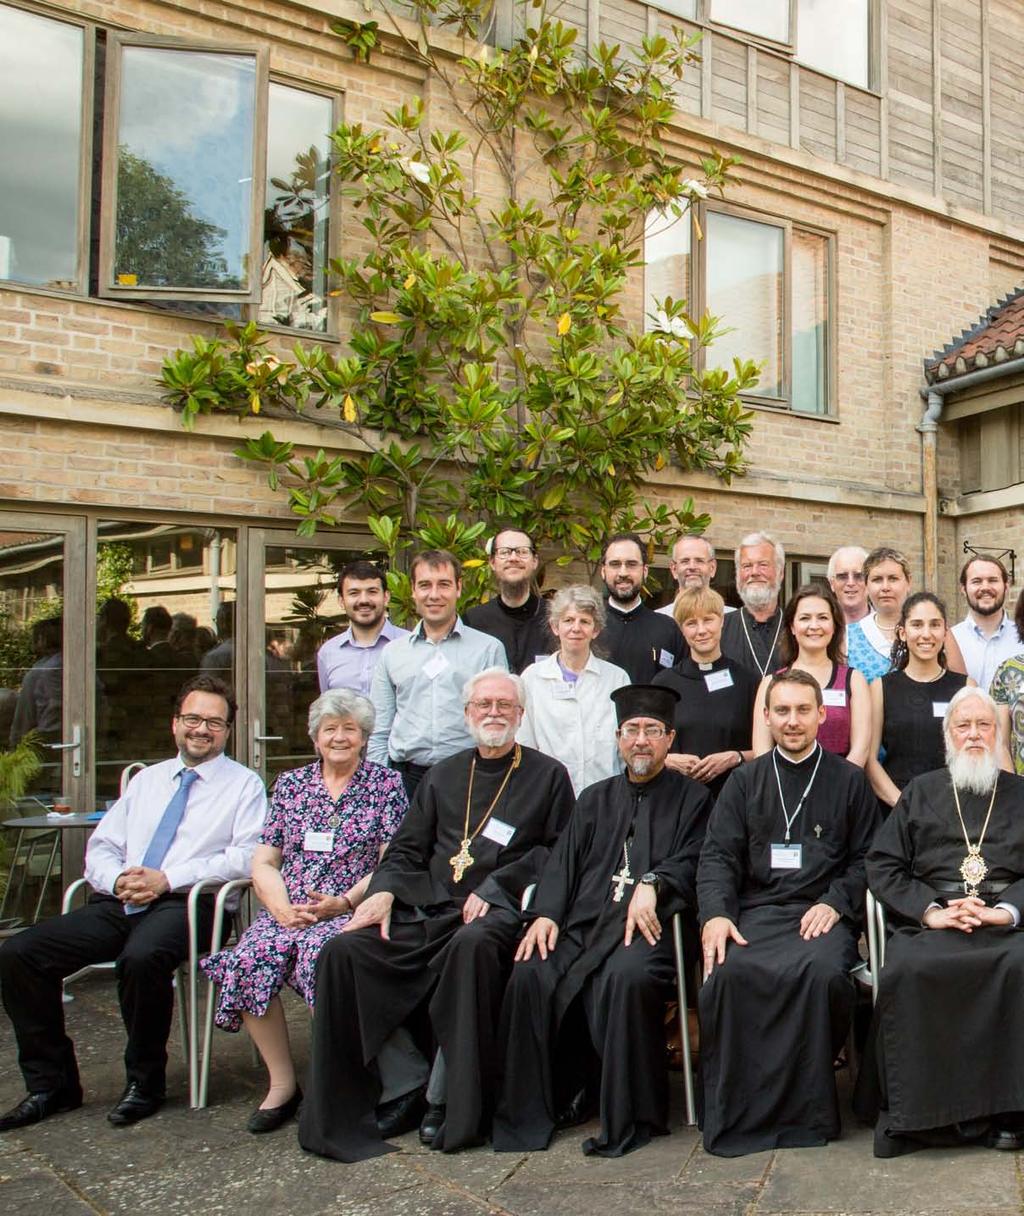 A MESSAGE FROM THE PRINCIPAL Iwould like to thank everyone who participated in this special Institute event on 17 June, especially our host Archbishop Rowan Williams and Metropolitan Kallistos of